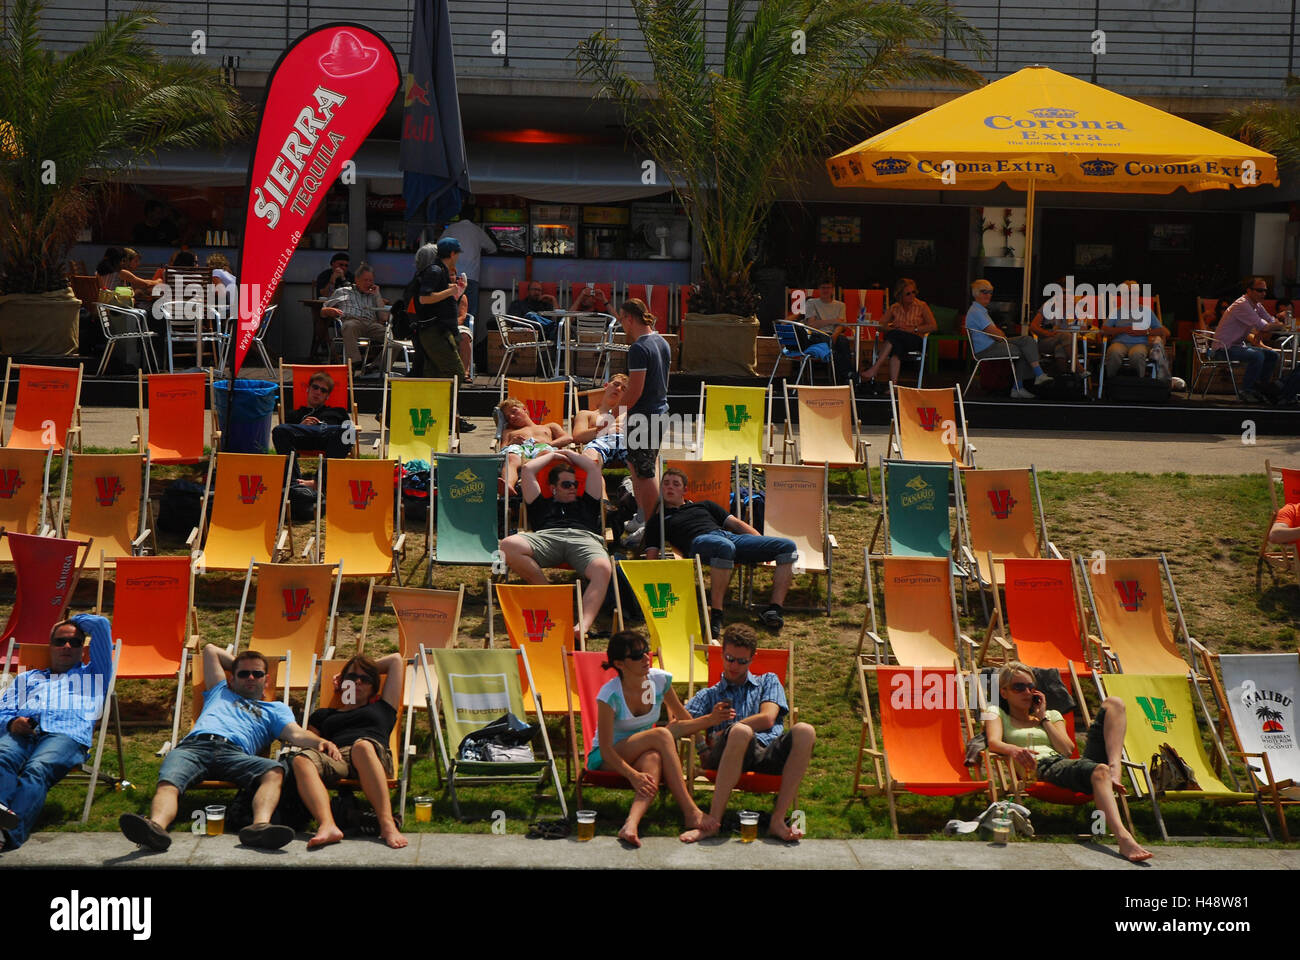 Germany, Berlin, Spree bow, beach cafe, deck chairs, people, town, capital, the Spree, River, riverside, summer, solar bath, guests, tourists, sun benches, take it easy, détente, rest, leisure time, Stock Photo